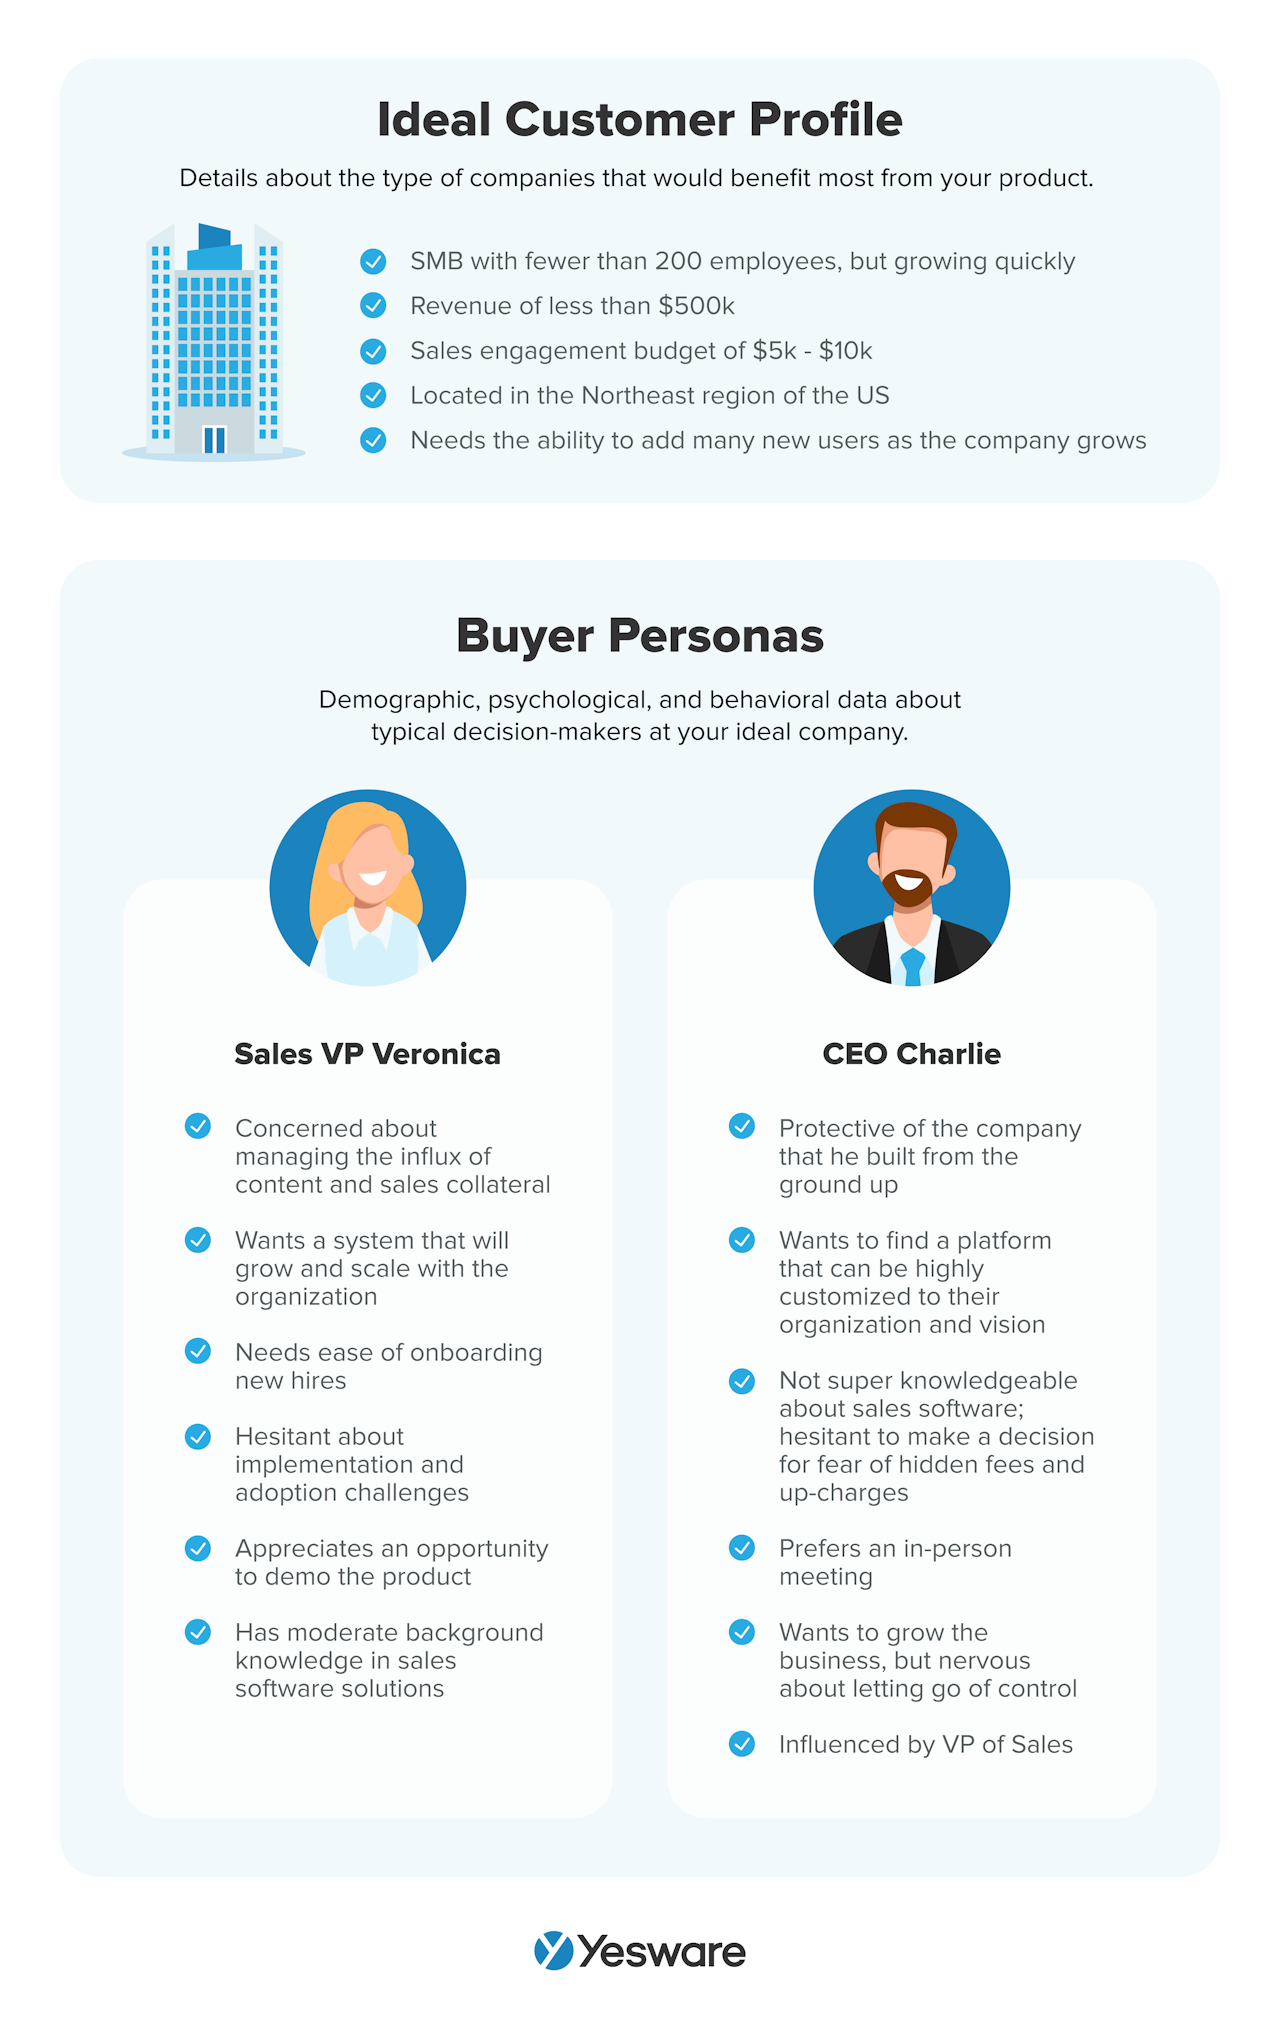 buying motives: ideal customer profile and buyer persona